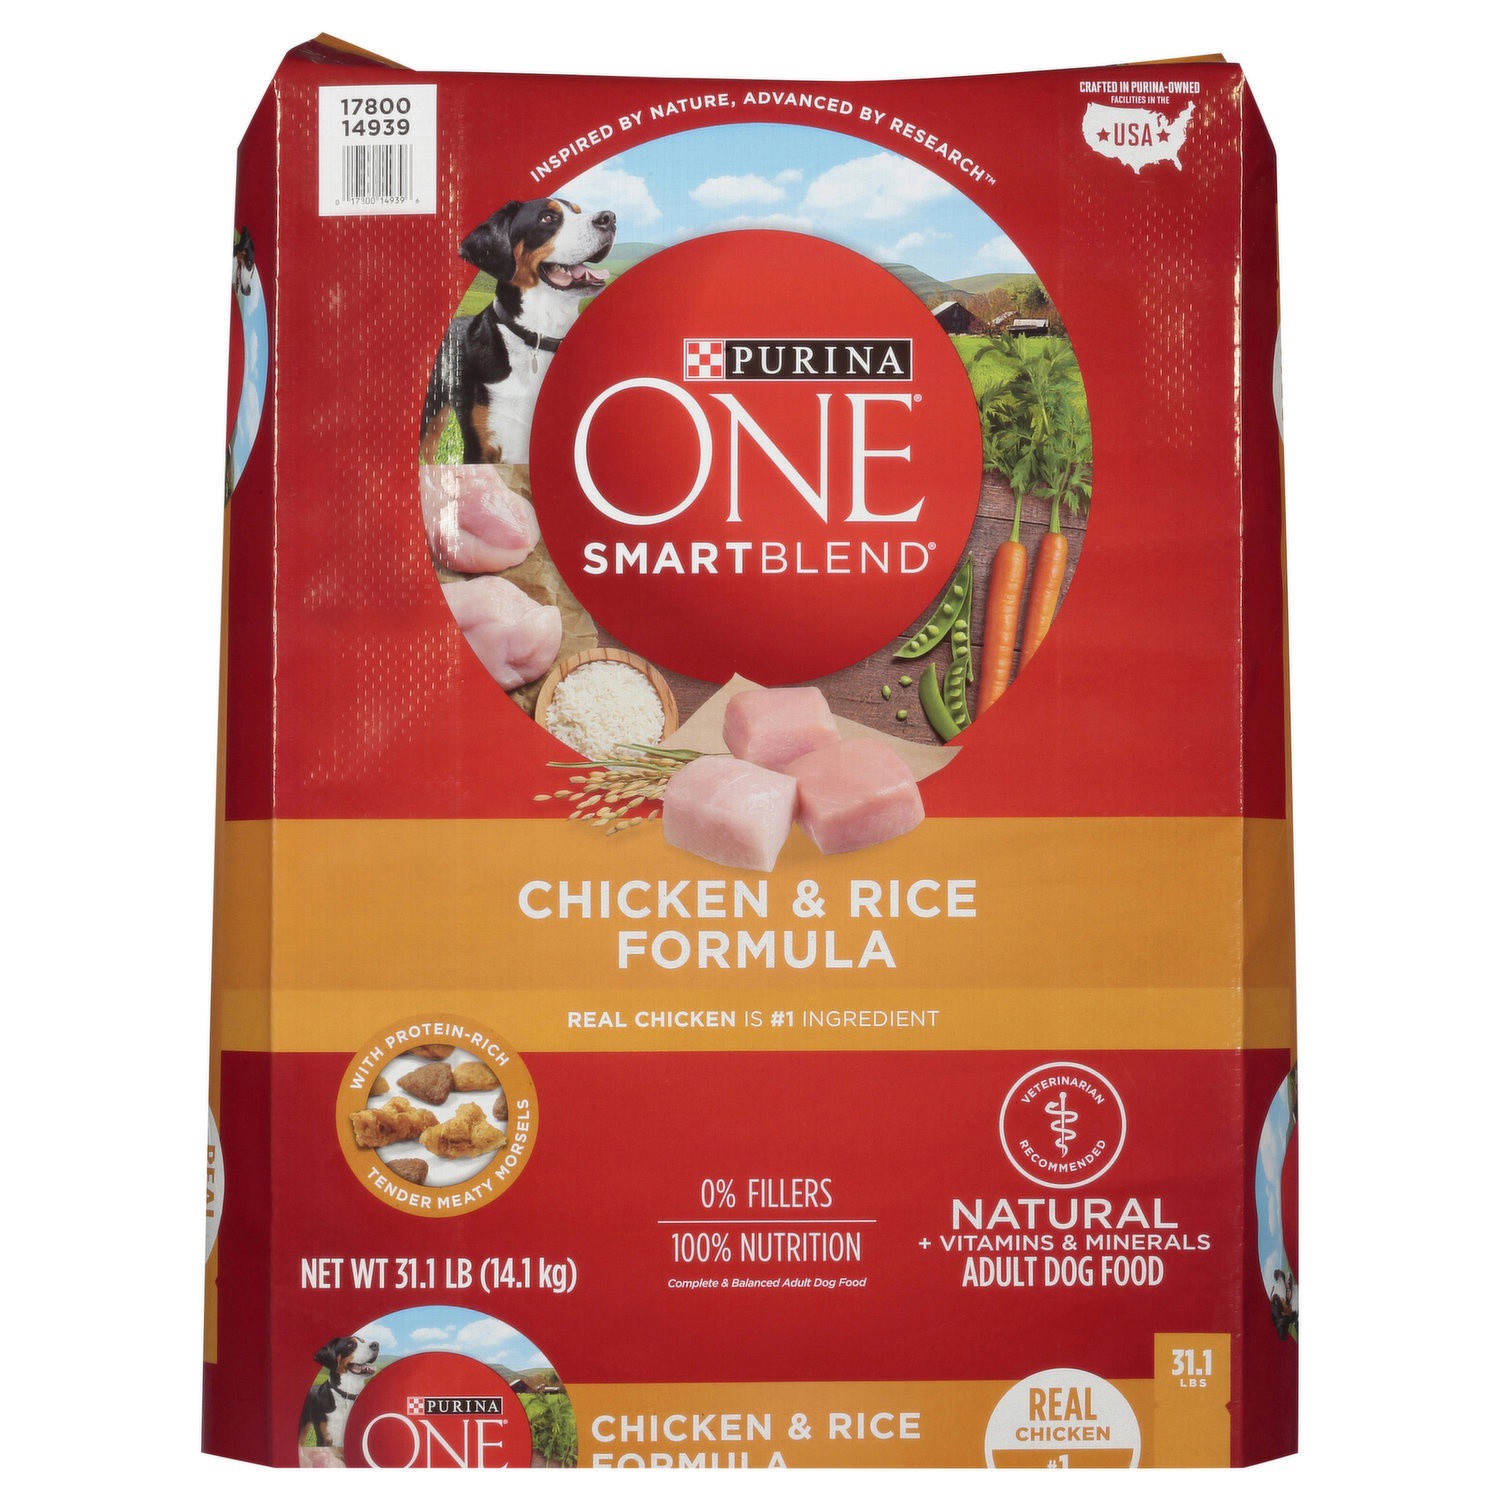 slide 1 of 9, Purina ONE SmartBlend Natural Dry Dog Food with Chicken & Rice - 31.1lbs, 31.1 lb